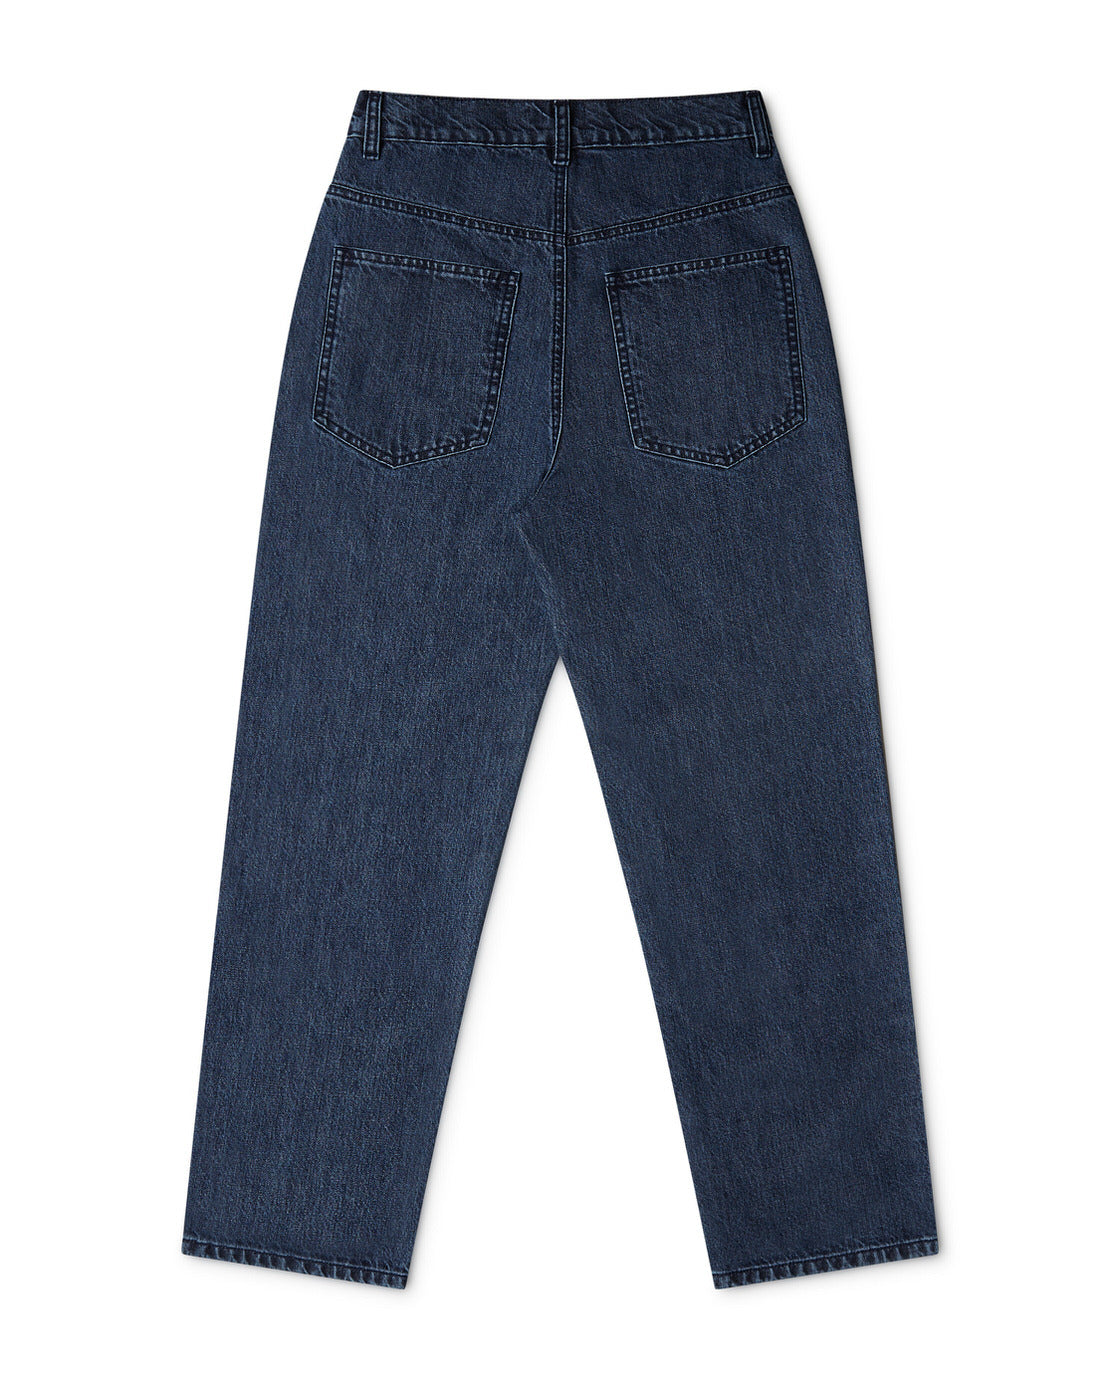 Blue jeans denim made from organic cotton by Matona